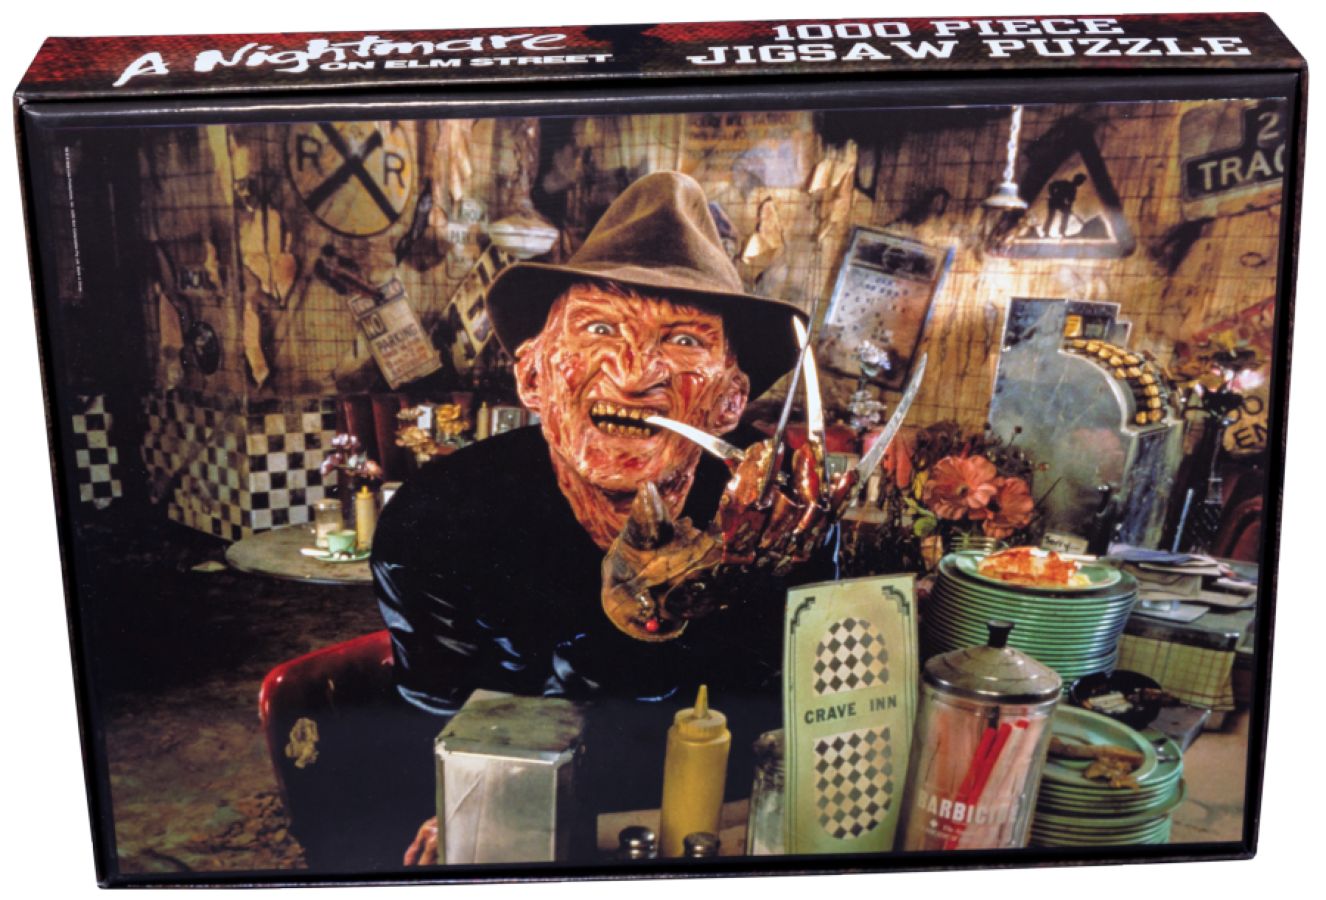 A Nightmare on Elm Street - Freddy Krueger at the Diner 1000 piece Jigsaw Puzzle - Ozzie Collectables